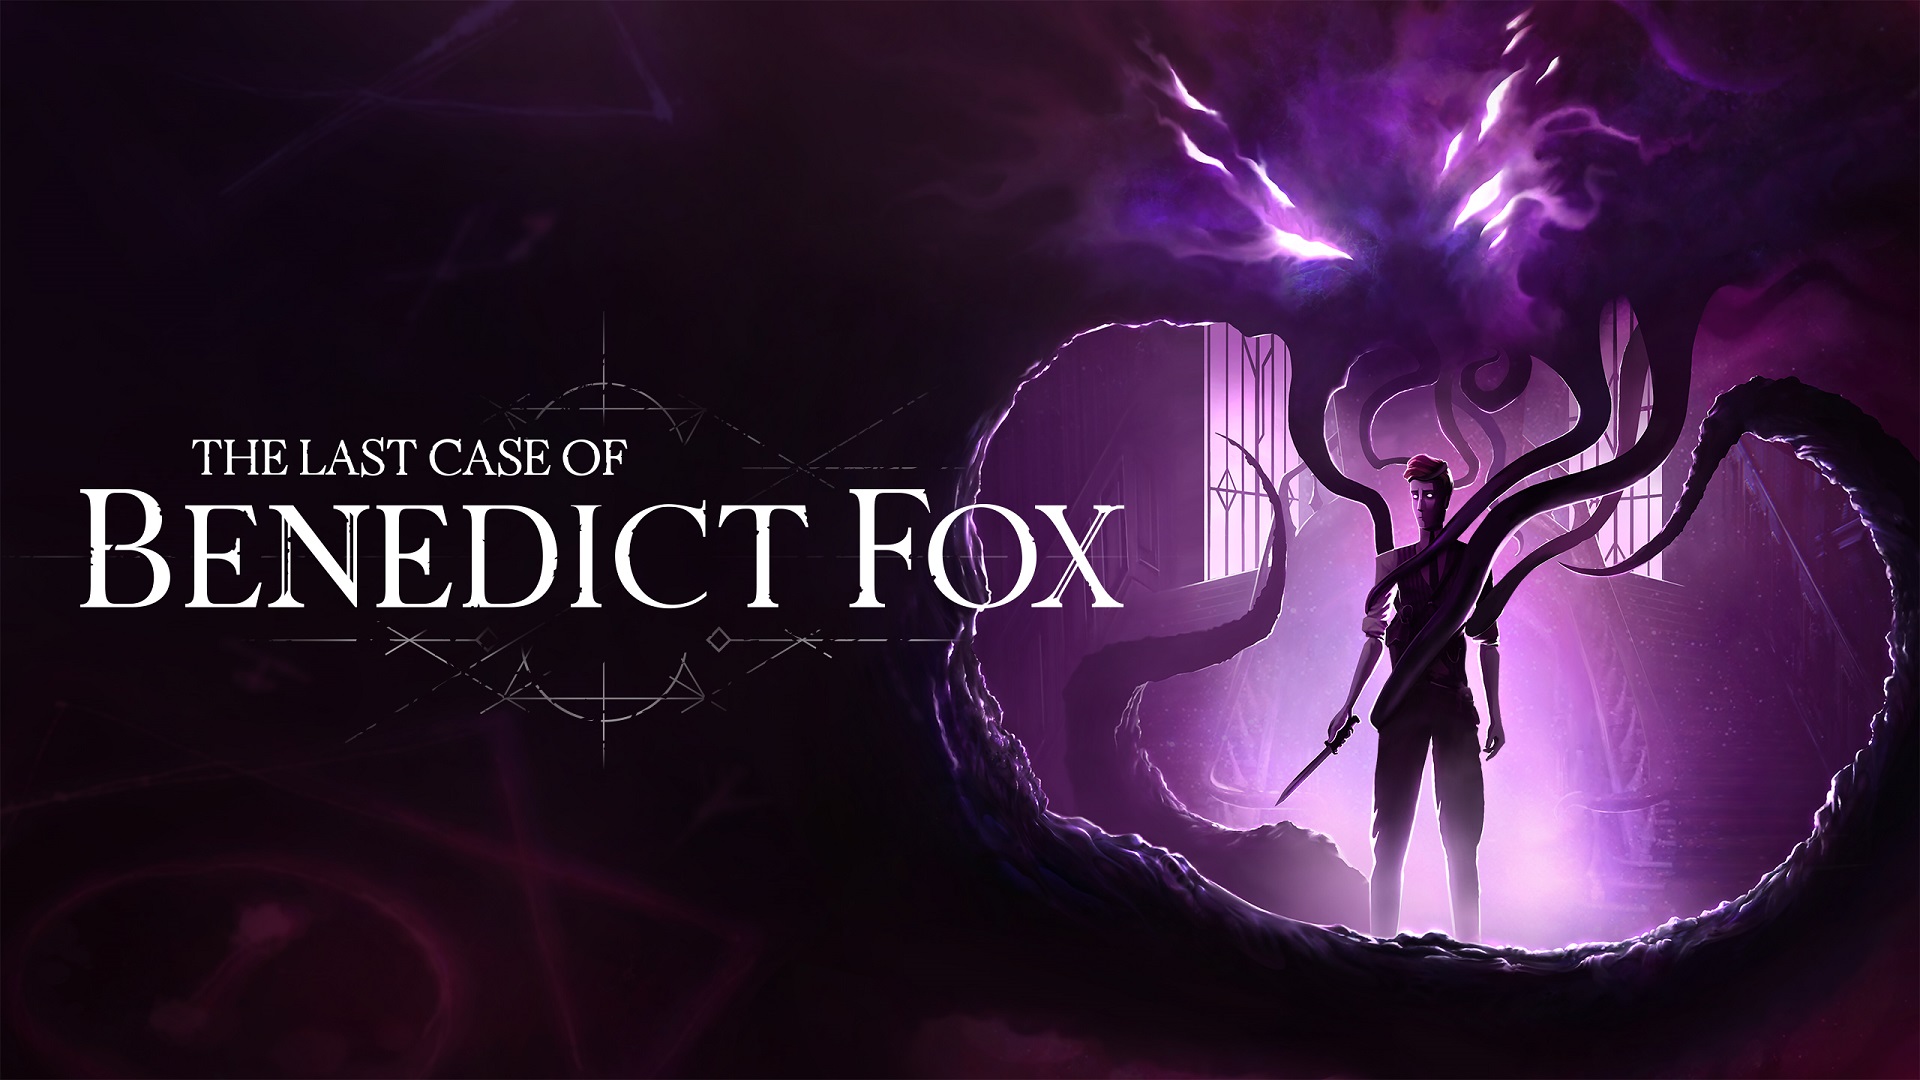 The Last Case of Benedict Fox gets a PlayStation 5 port